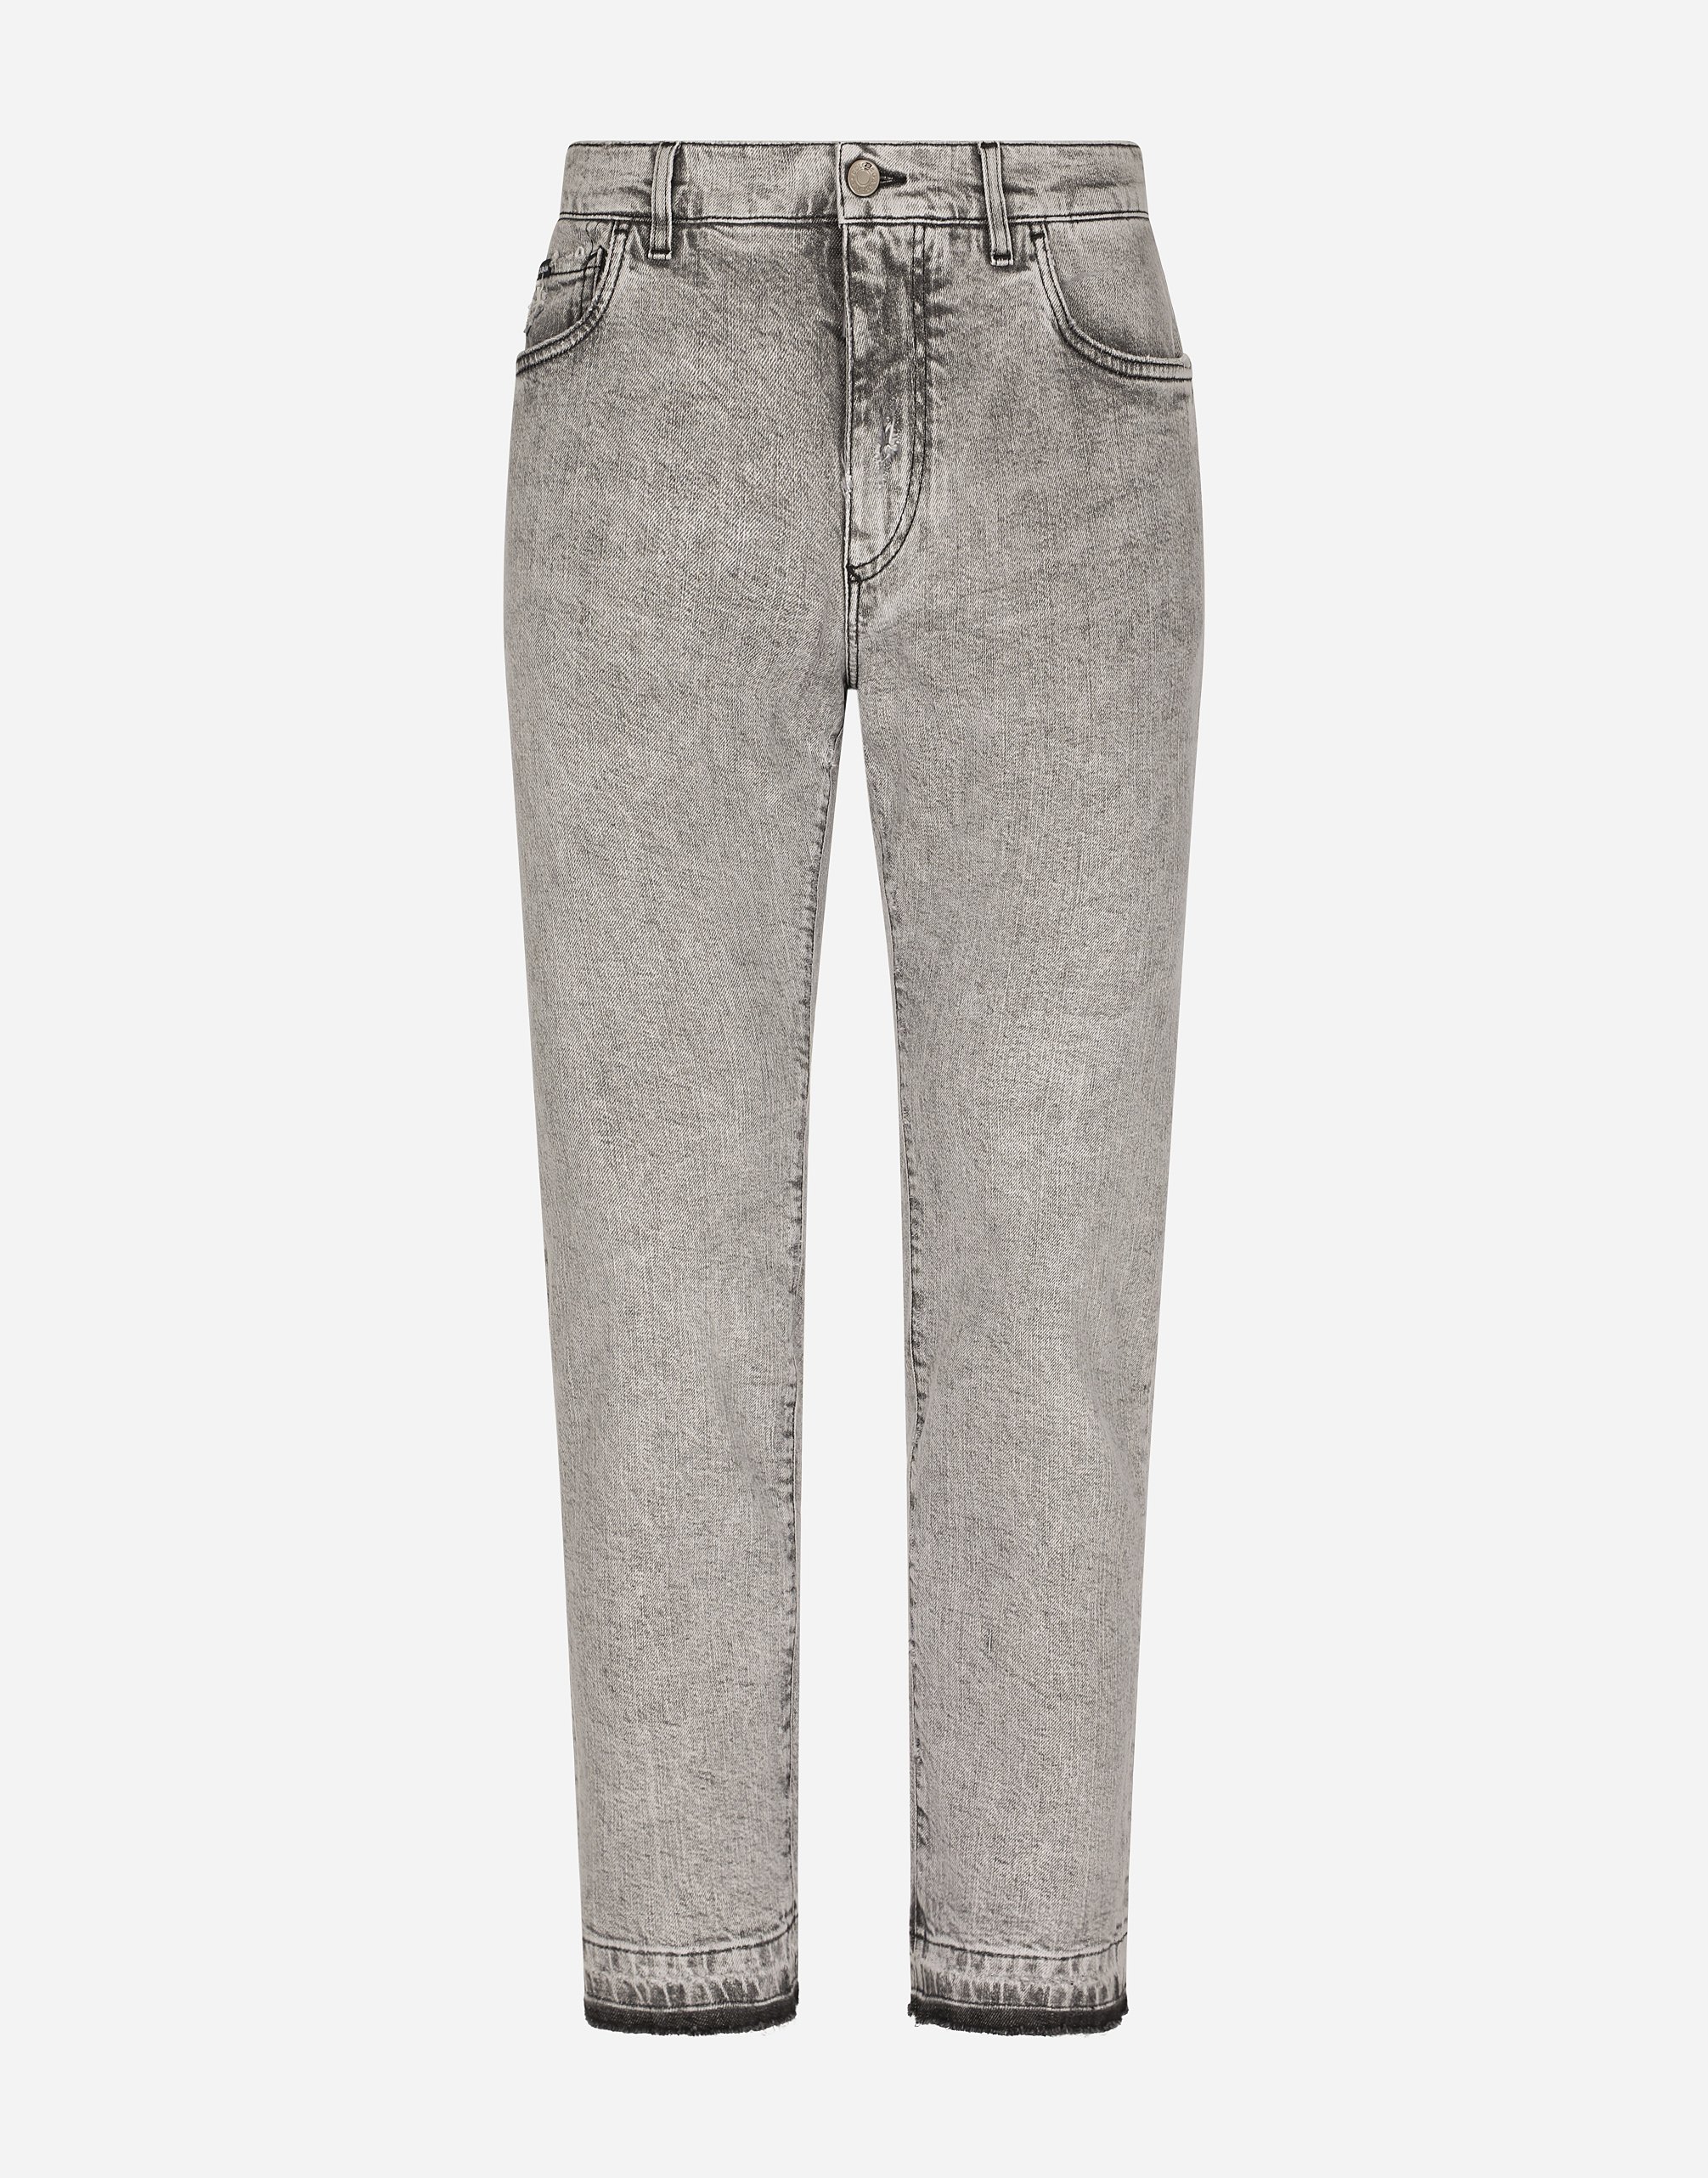 Gray skinny stretch jeans with ripped hems in grey